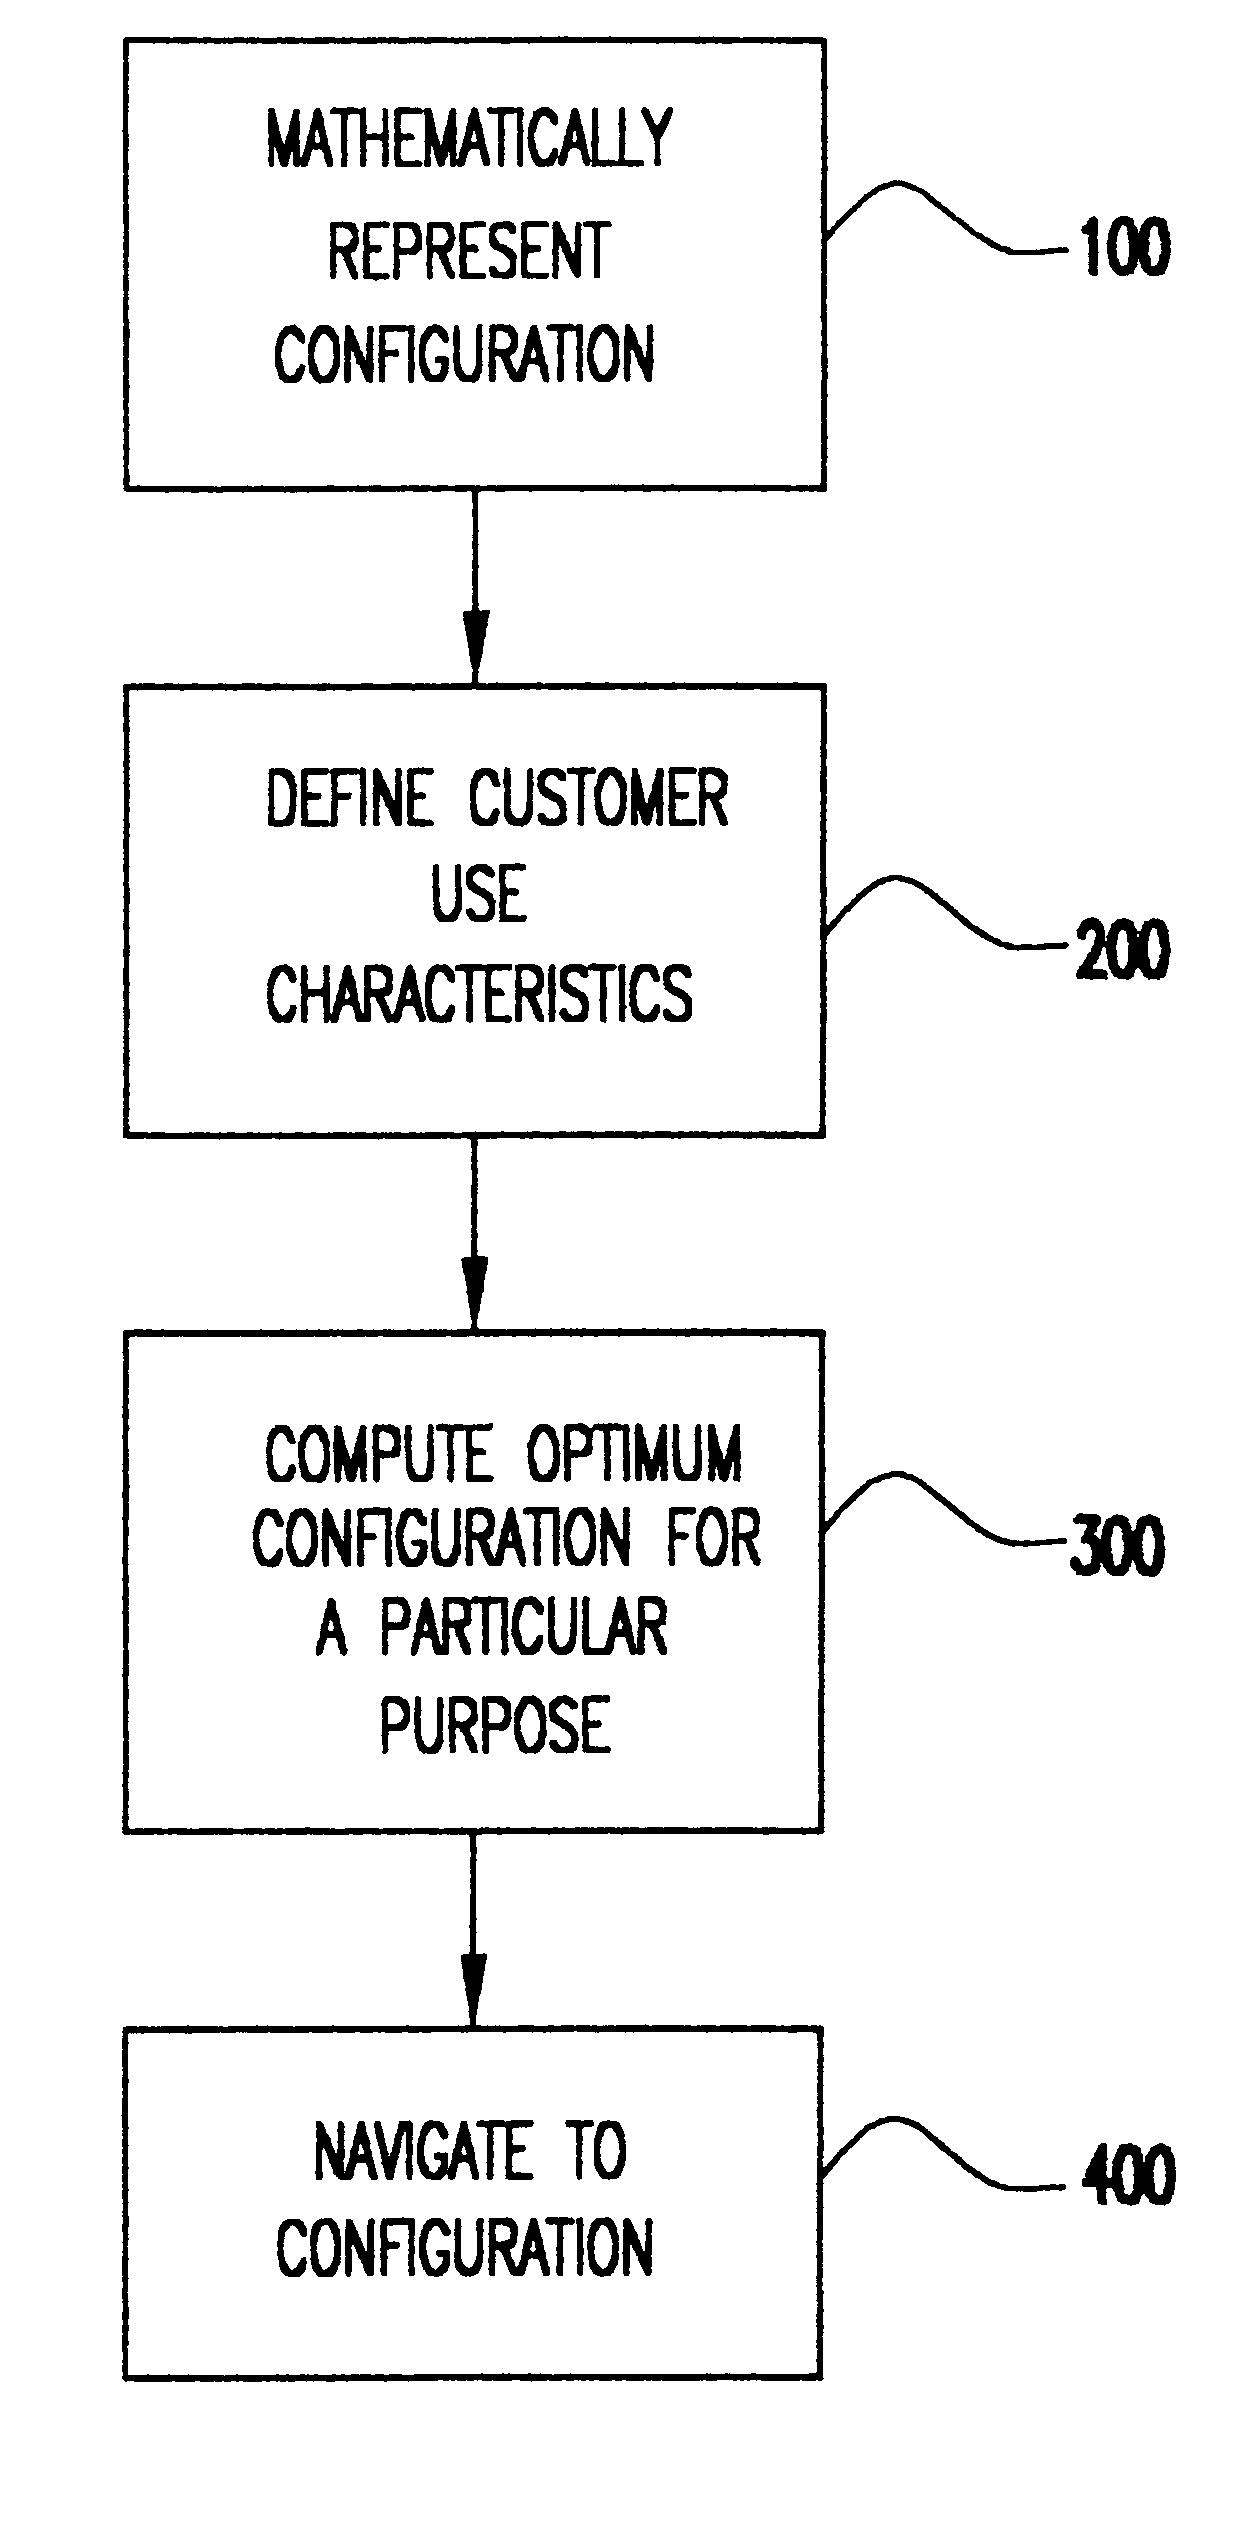 Specifying complex device configeration through use characteristics